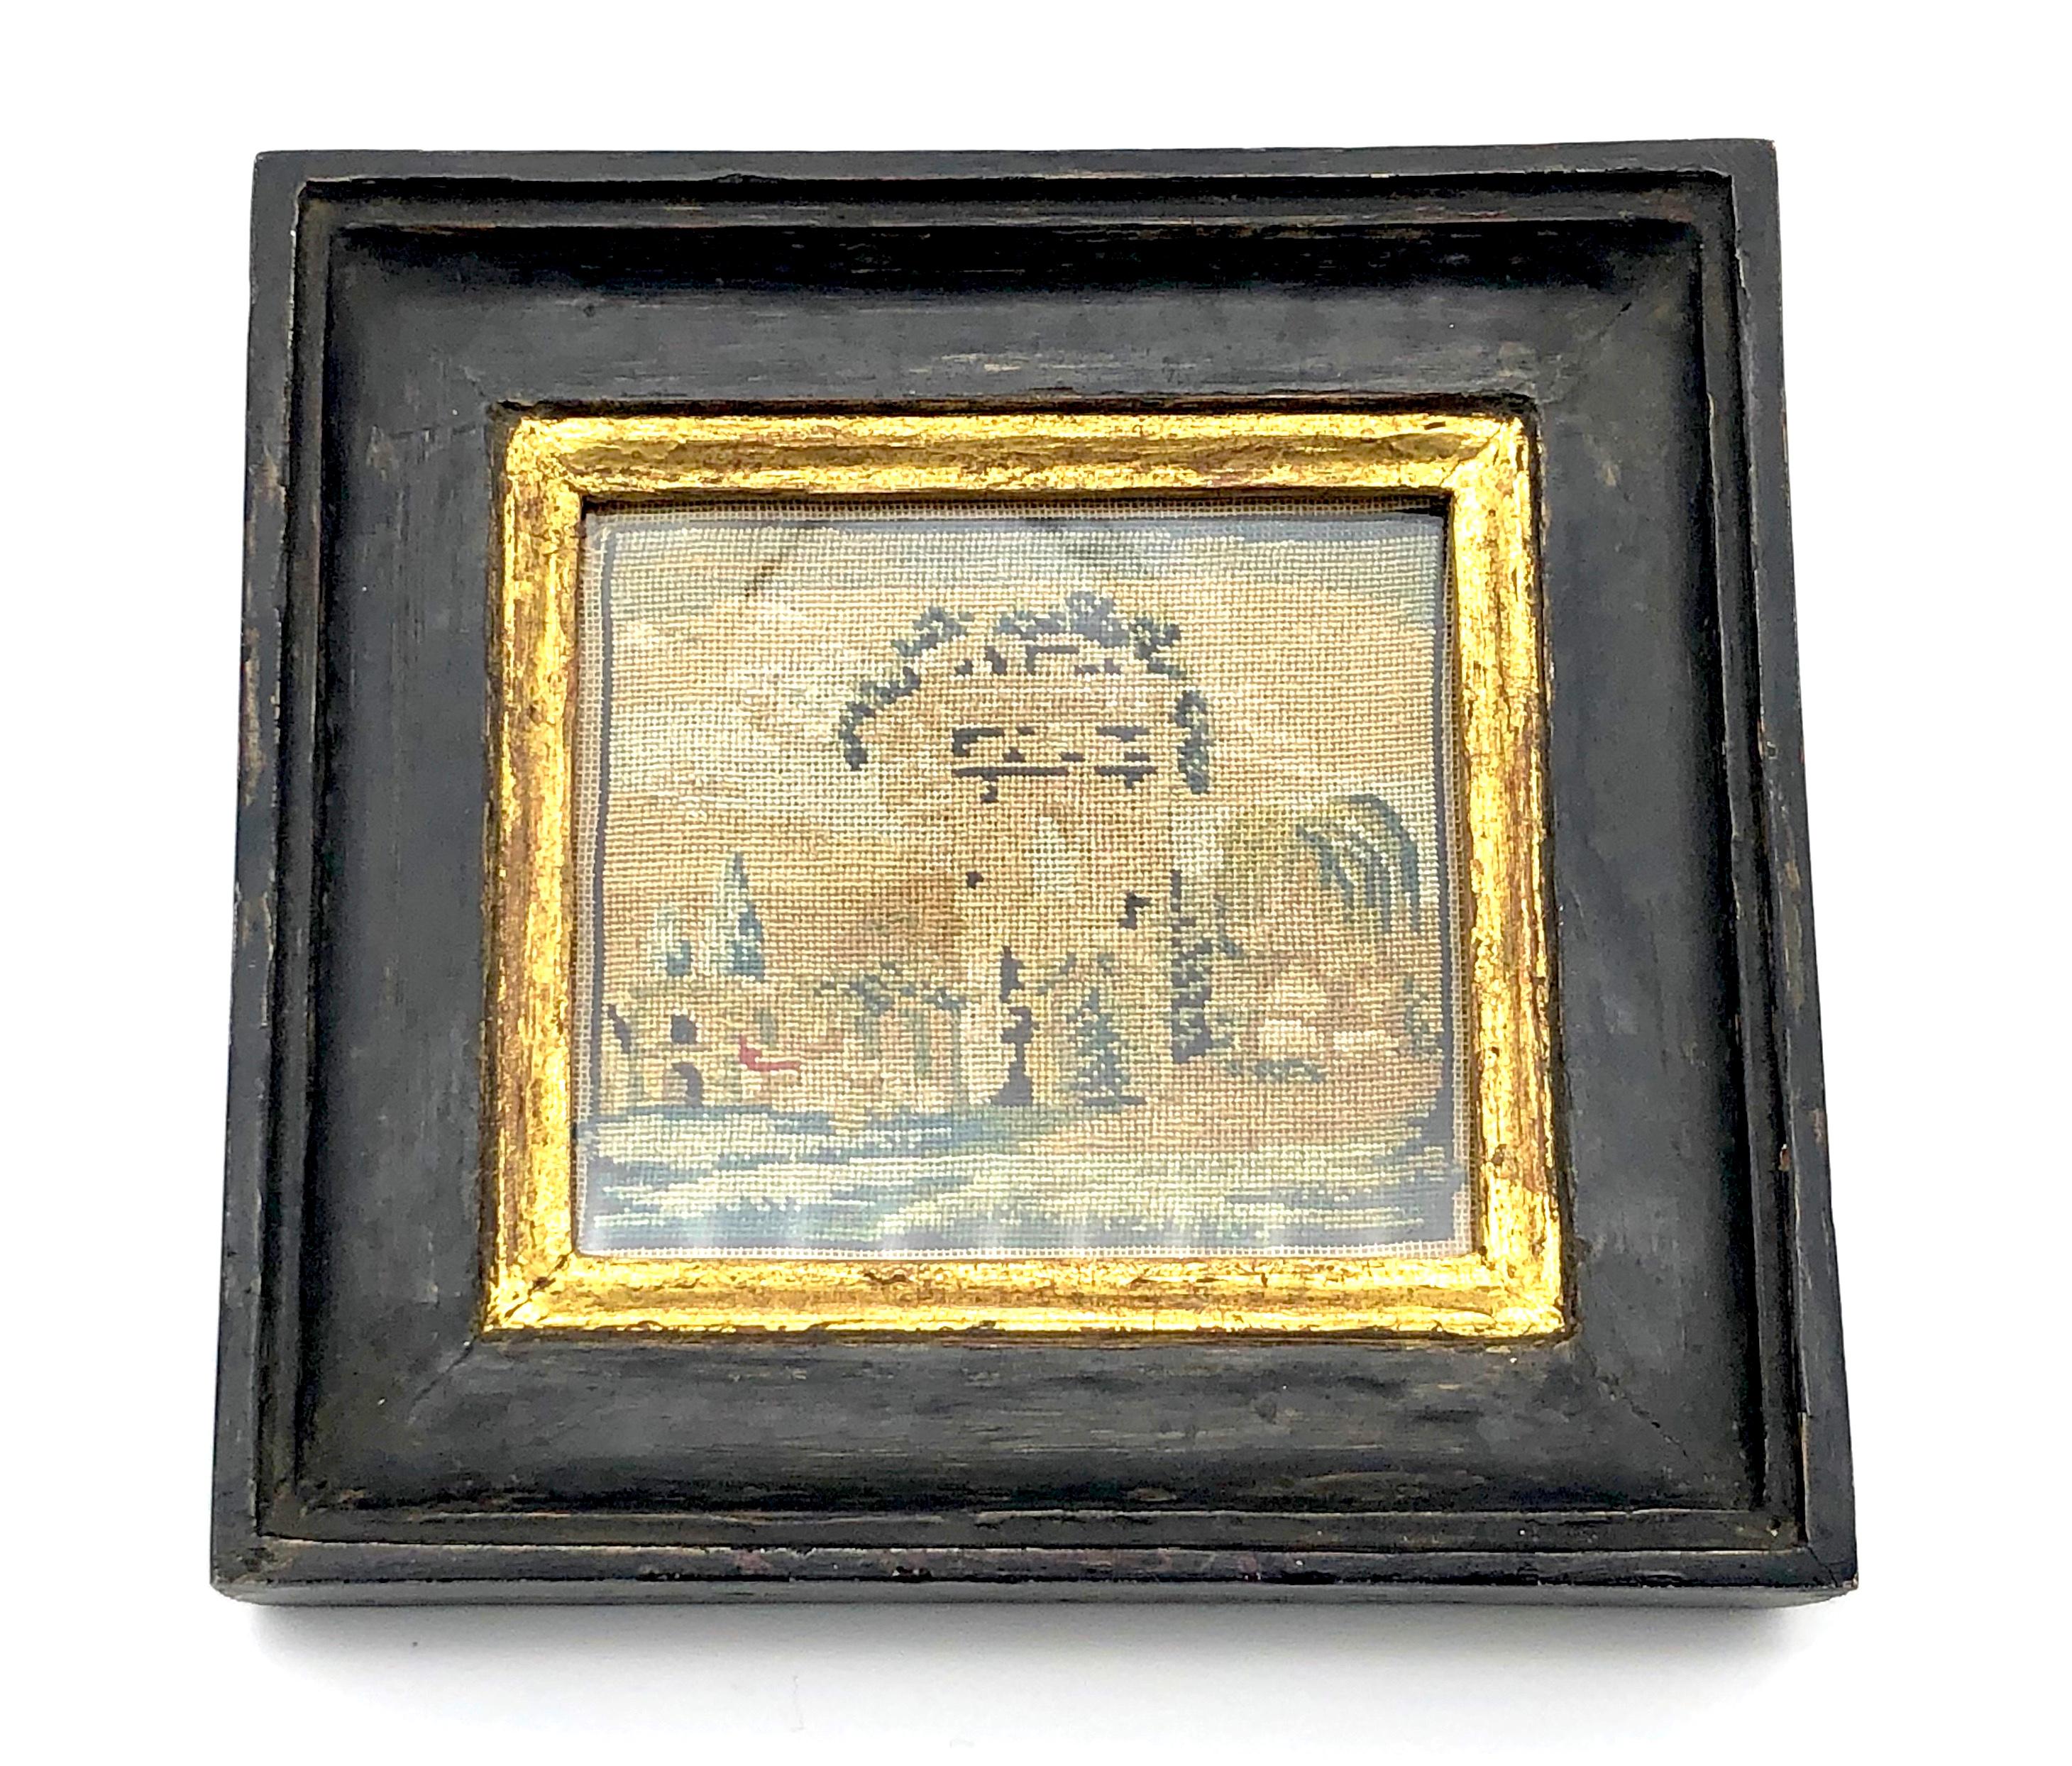 This is a rare embroidered Grand Tour souvenir of an italian landscape with archutectural motifs.
This beautiful miniature embroidery is in good order, although the colours have slightly faded in the coure of nearly 230 years.